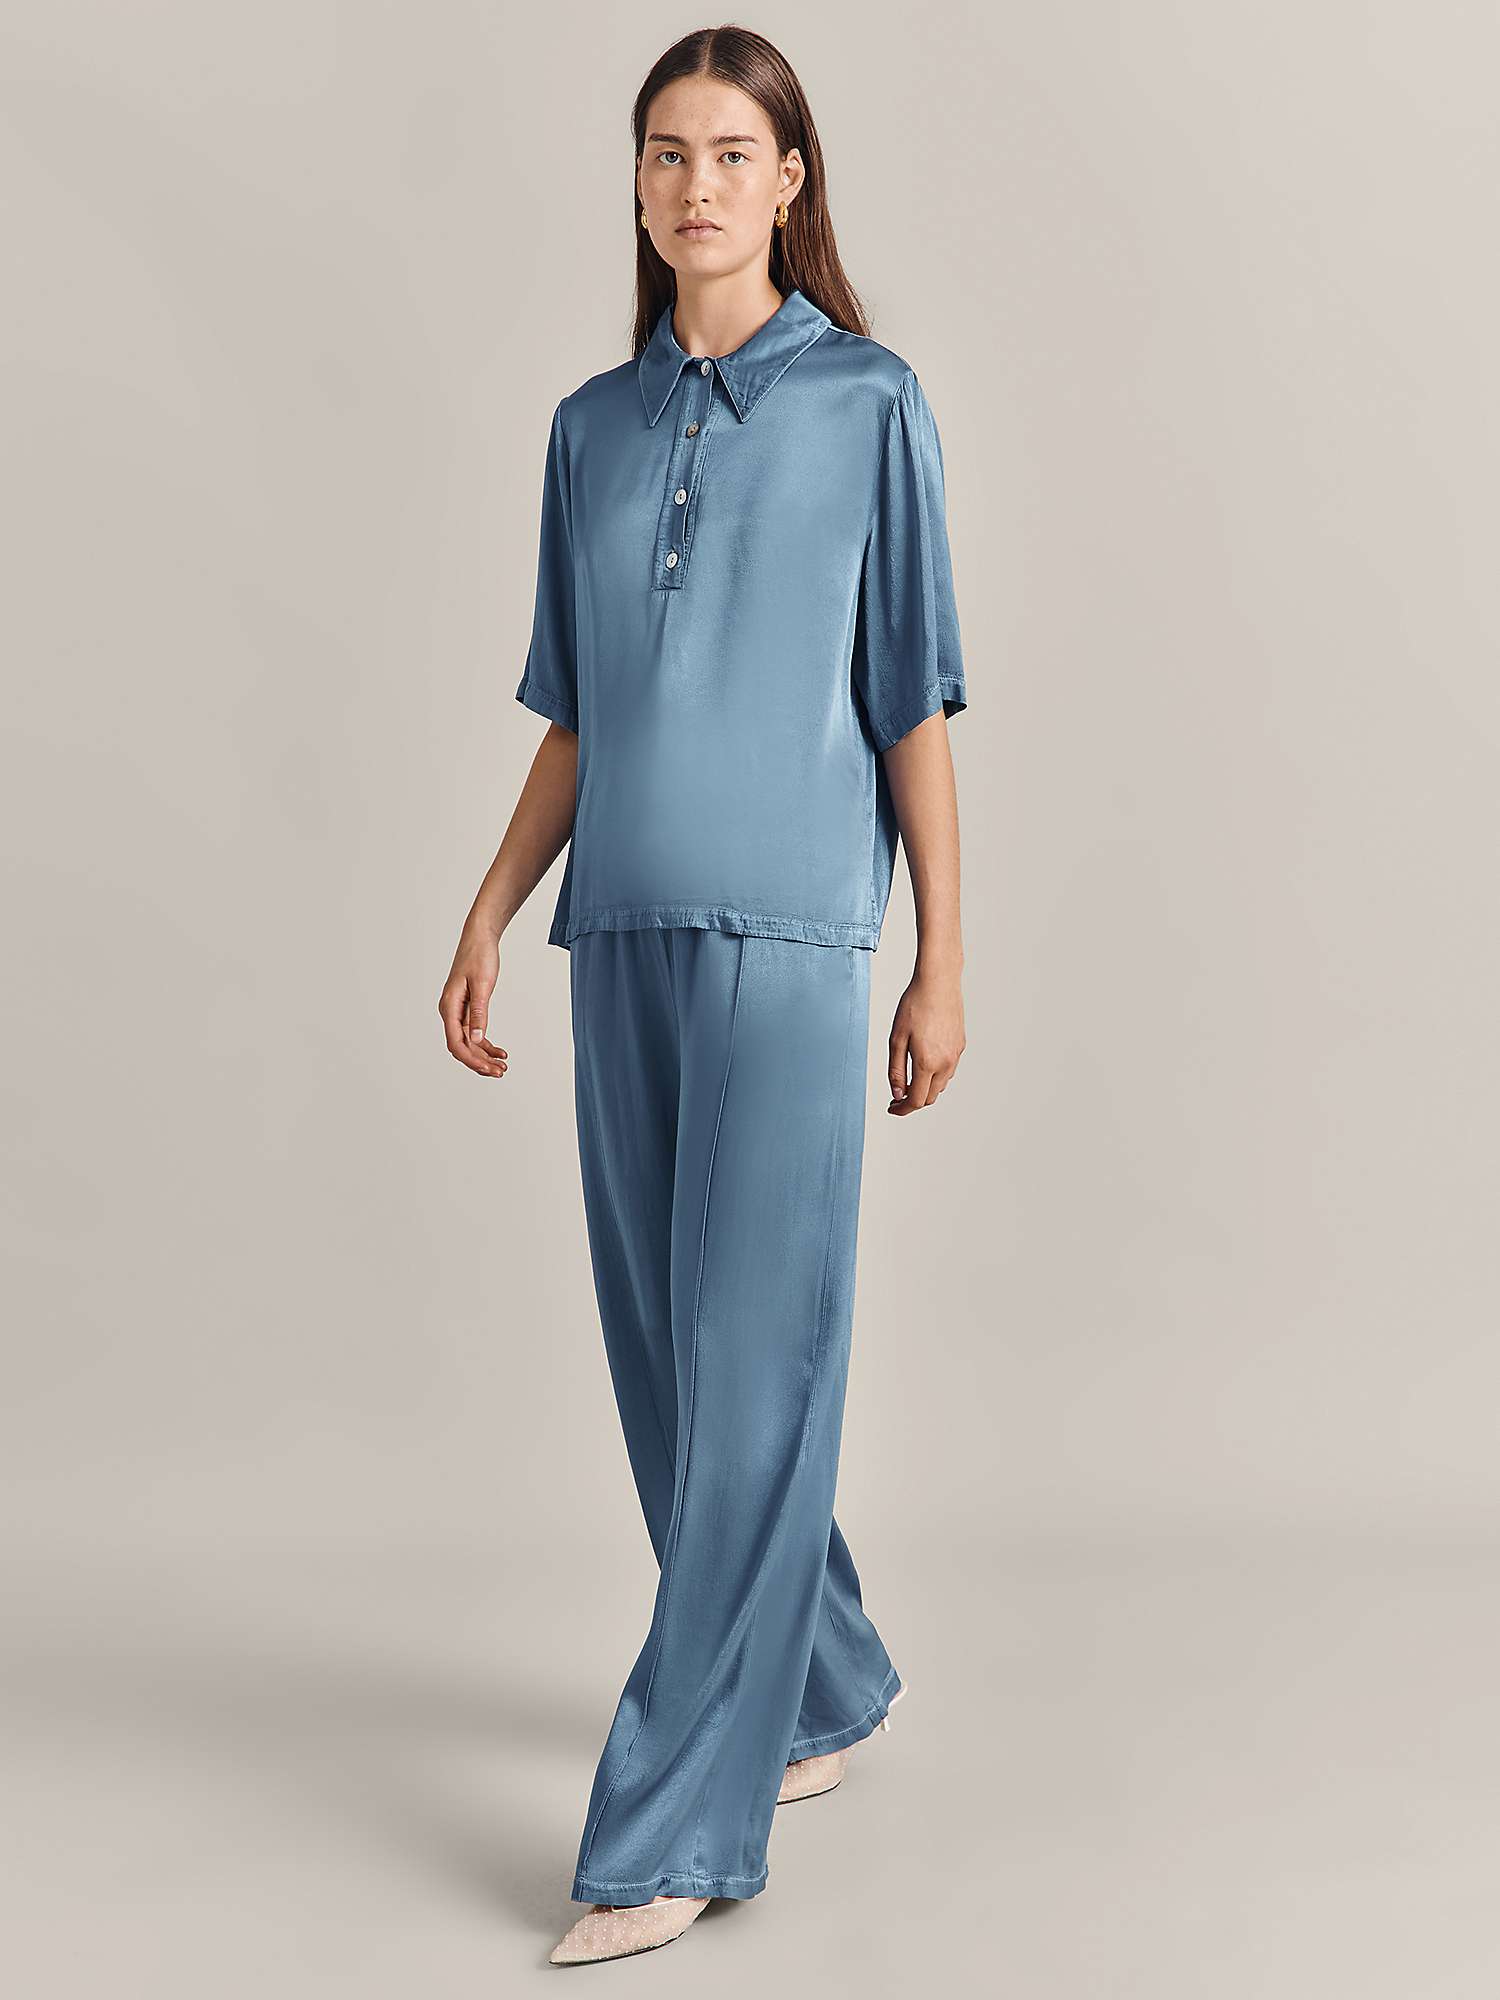 Buy Ghost Kendall Satin Top Online at johnlewis.com